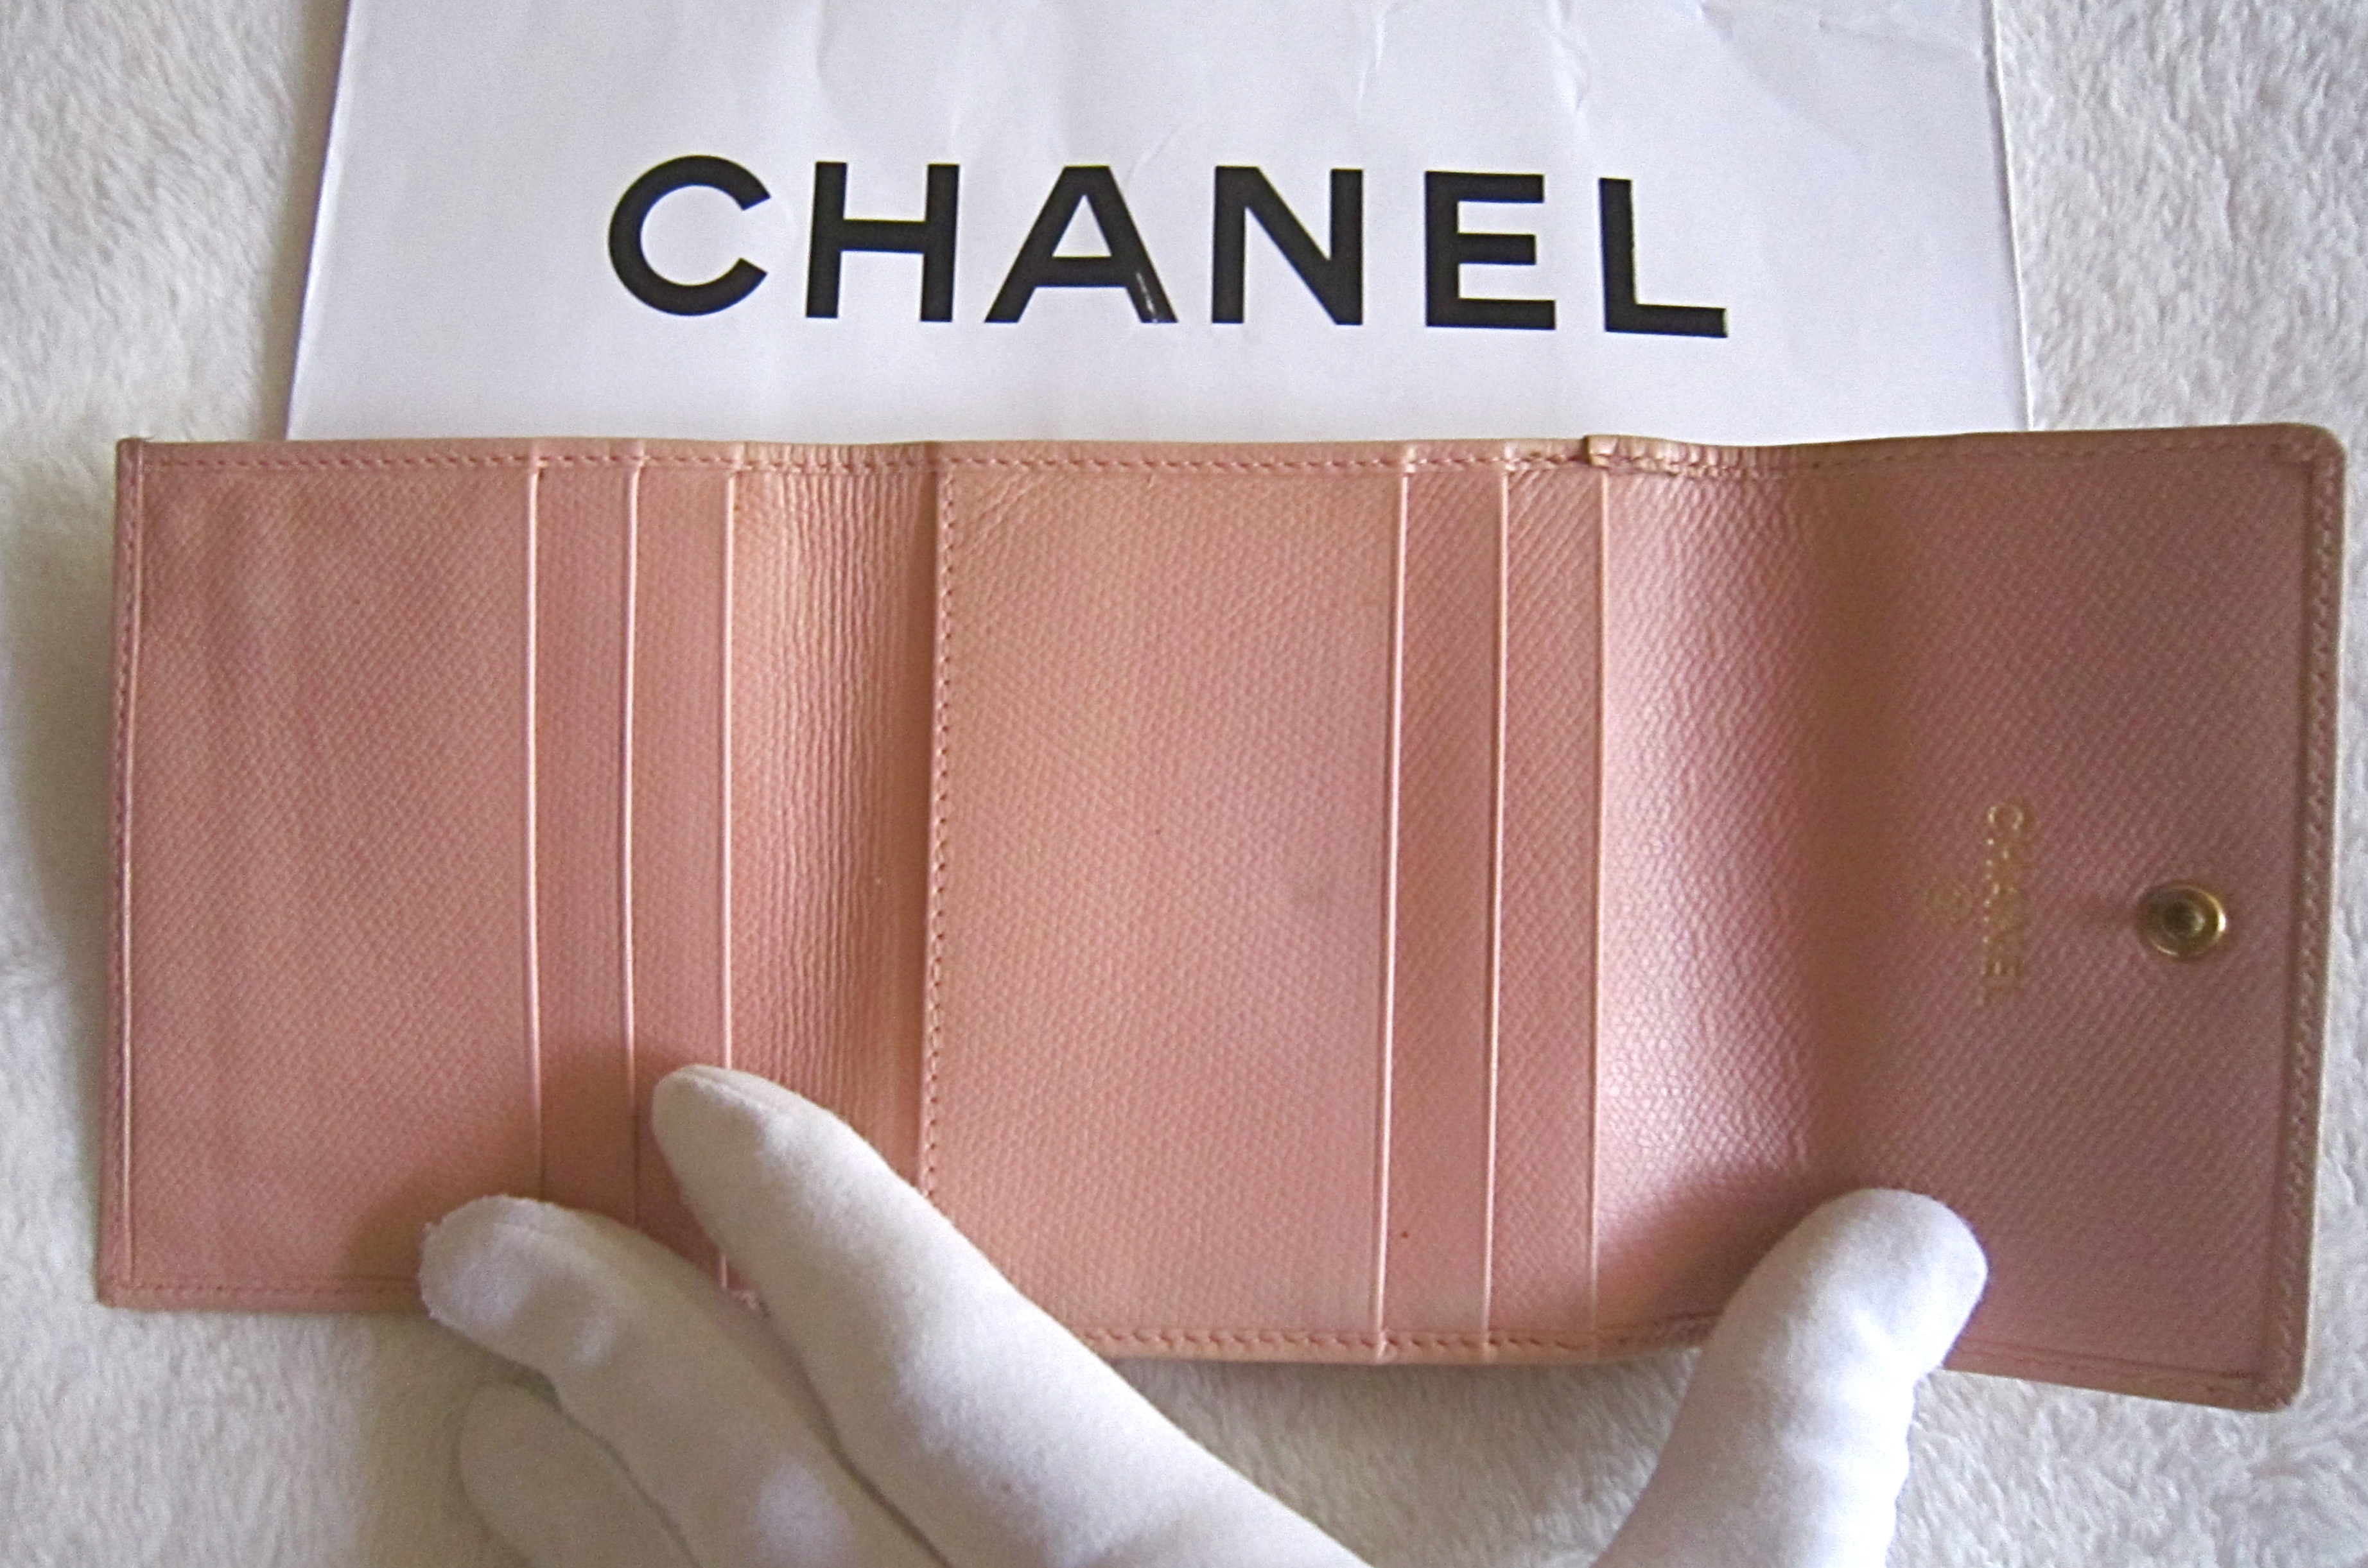 Chanel Pink Leather Gold Medallion French Bi-Fold Wallet